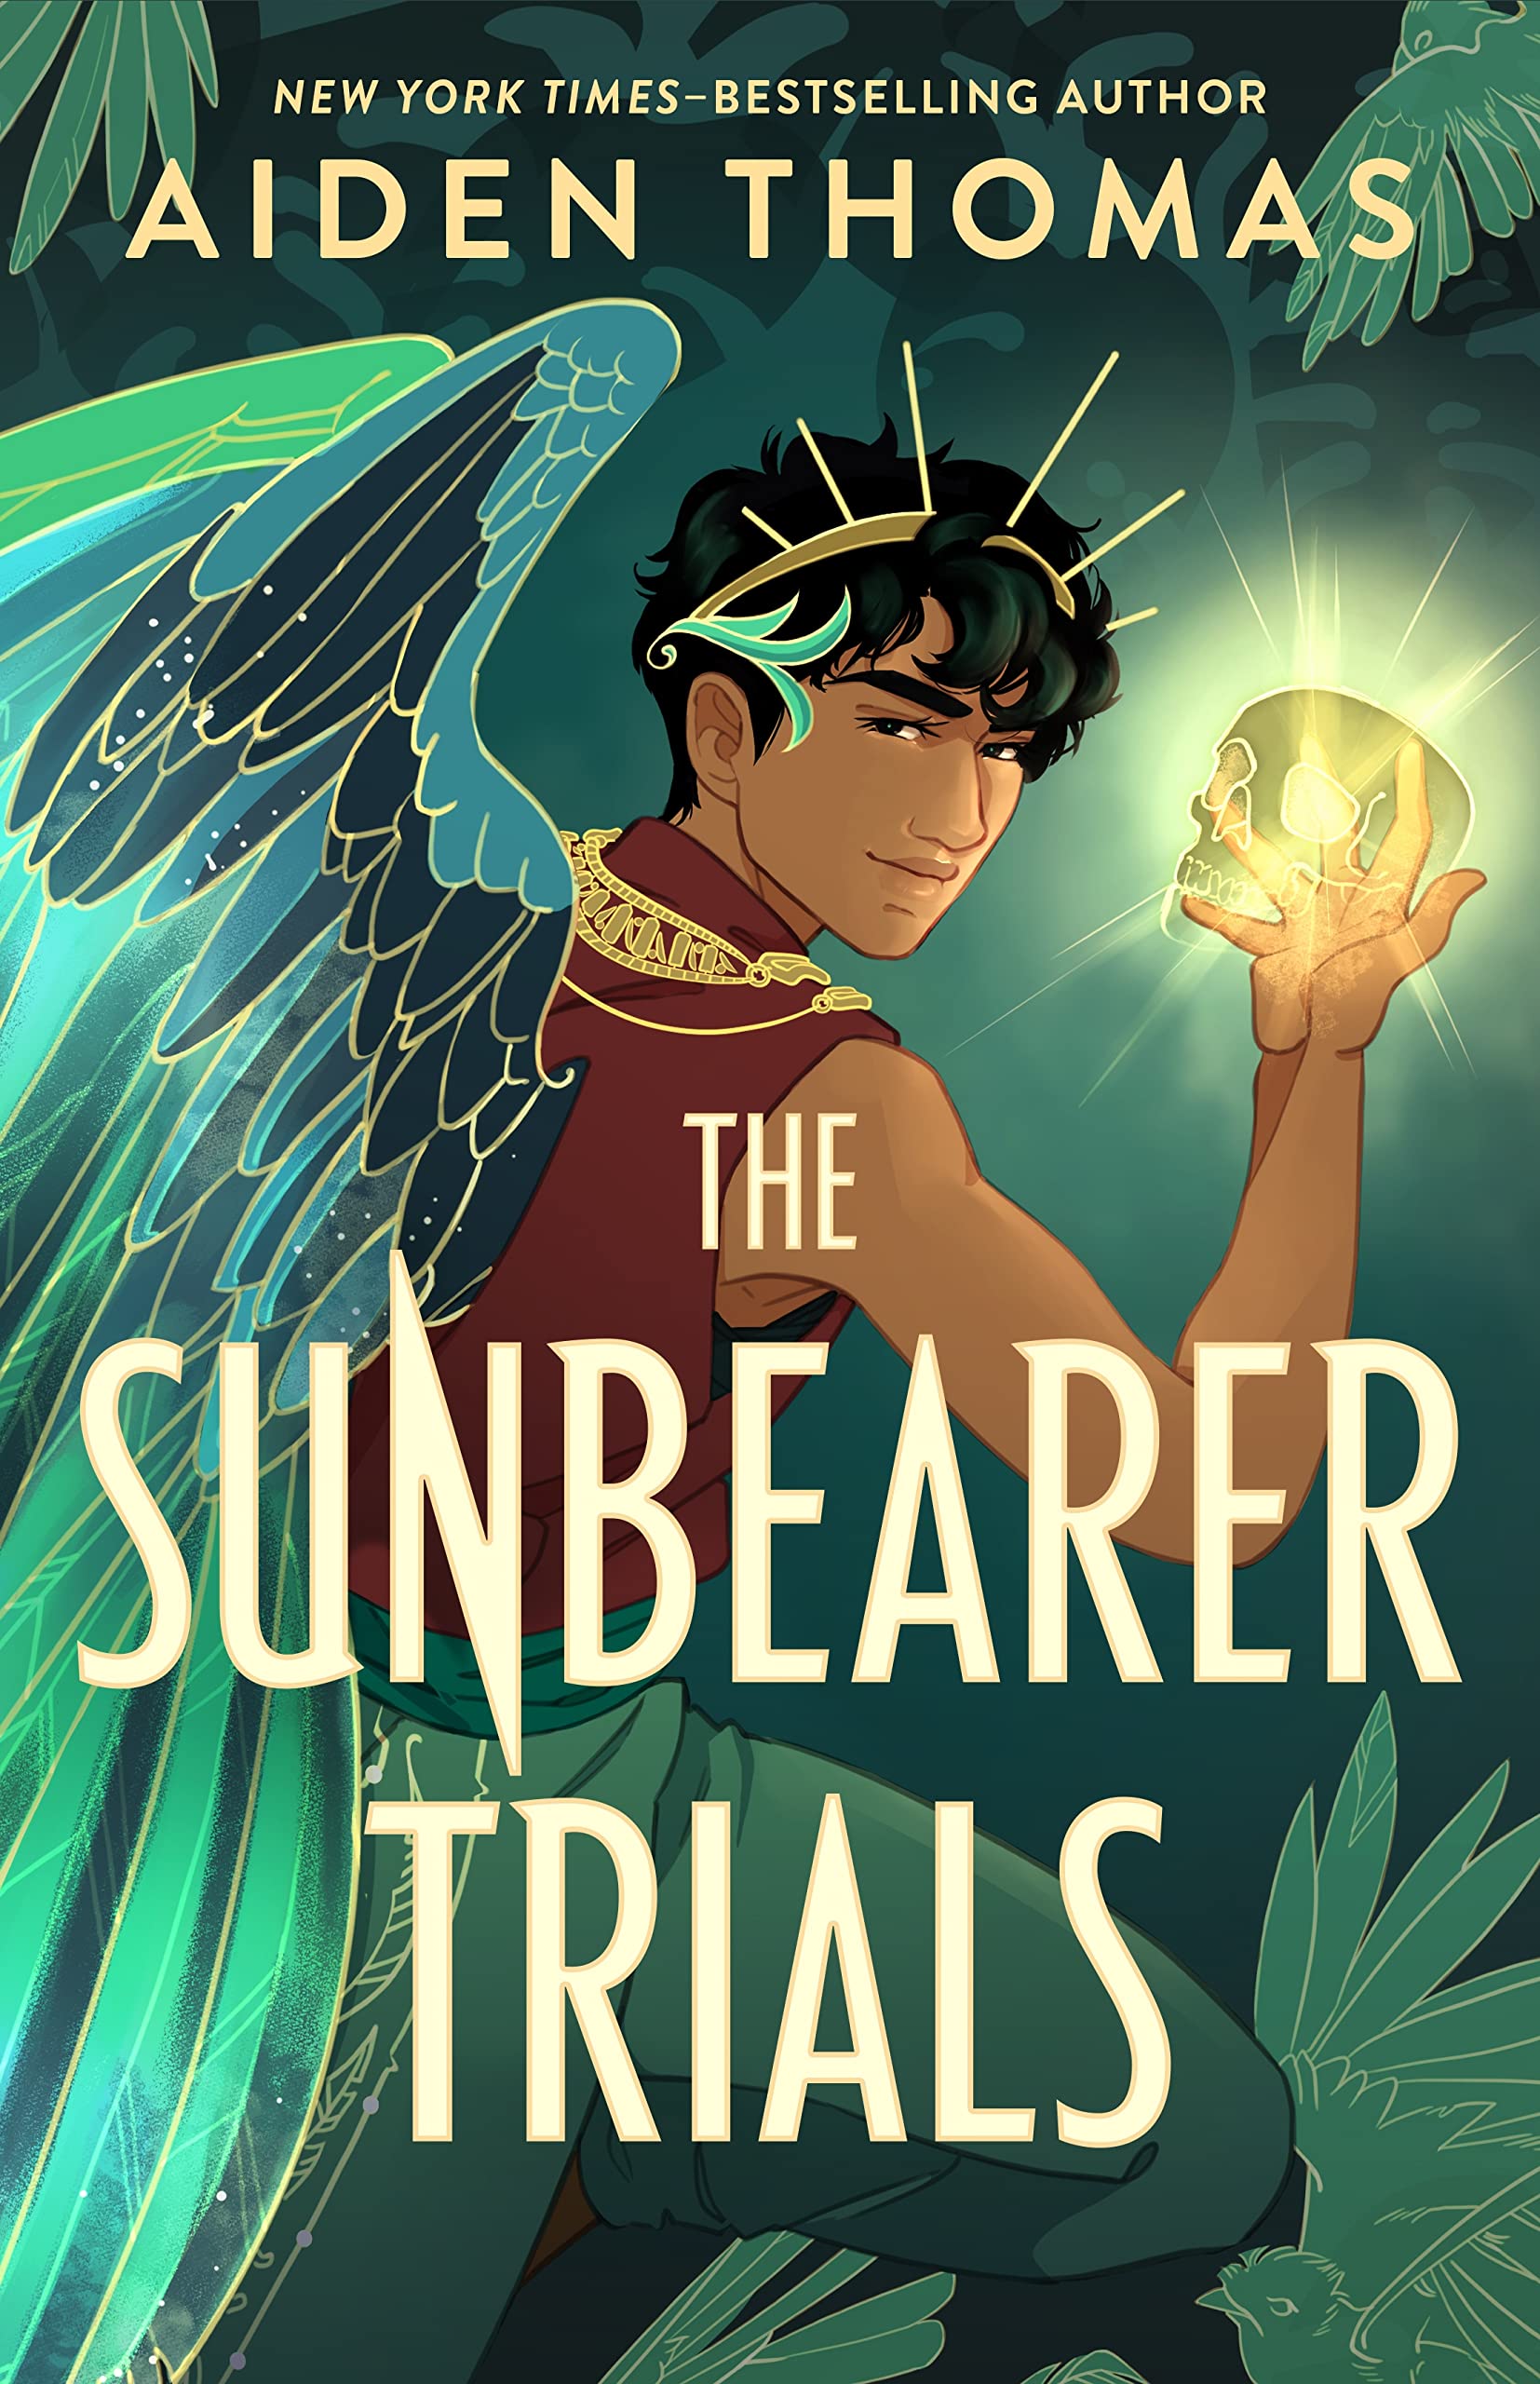 The image shown is the cover art for Aiden Thomas's The Sunbearer Trials. The image shows a teen boy with wings, a crown, and a glowing magical hand raised in the air. 